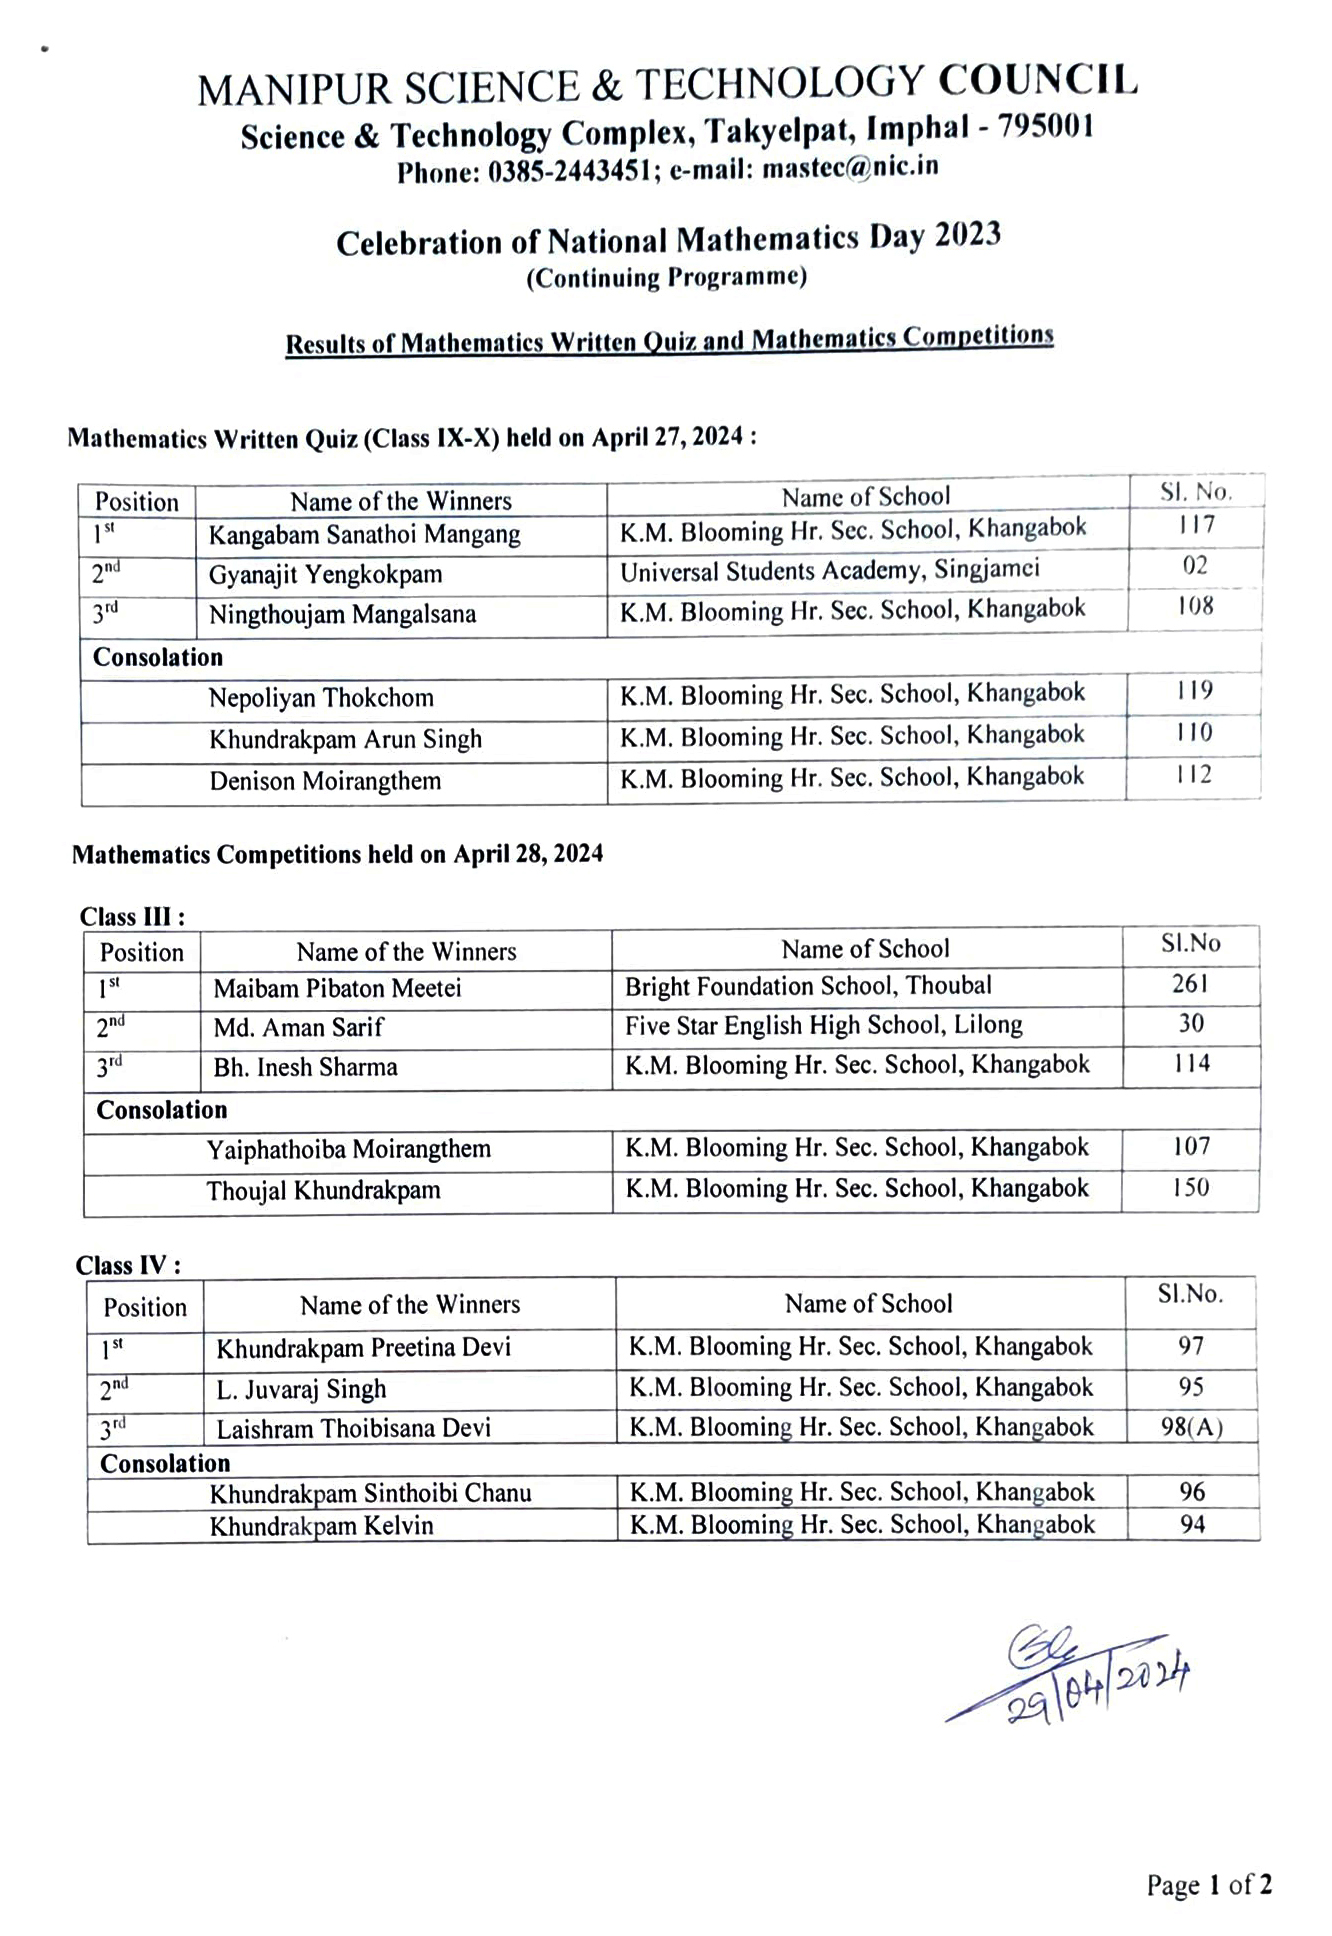 Maths Quiz and Competition Results1